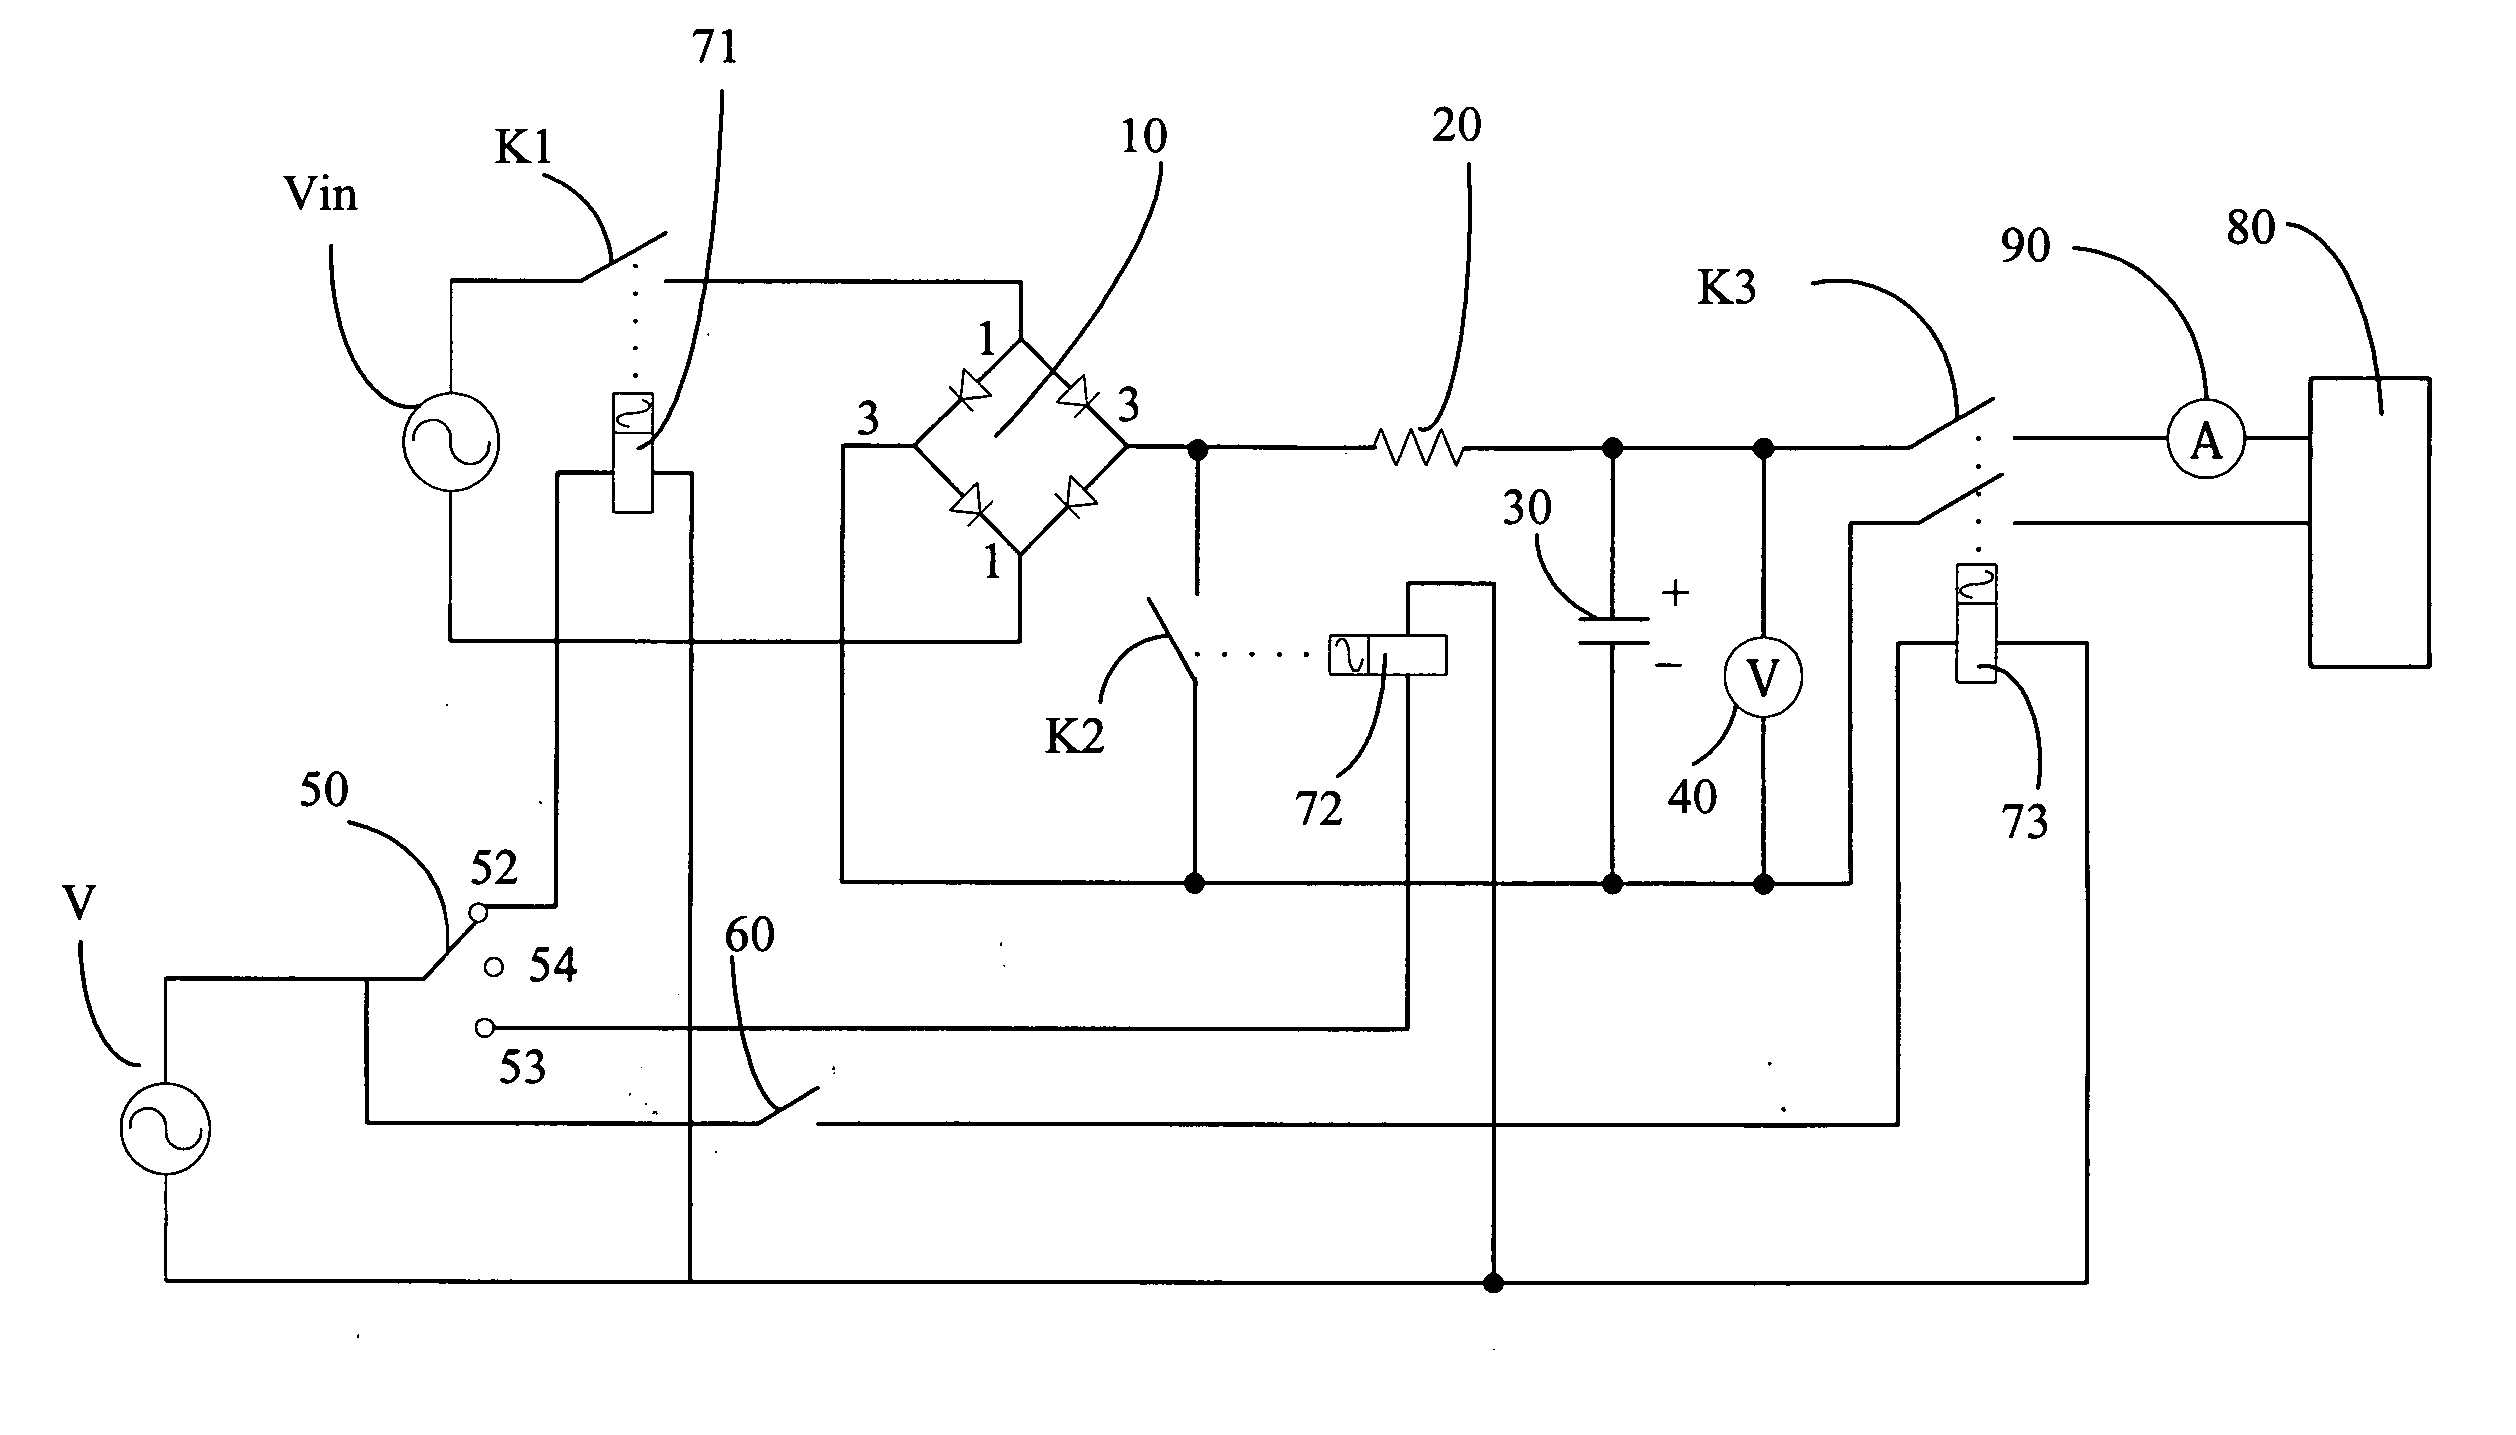 Circuit for testing inrush current